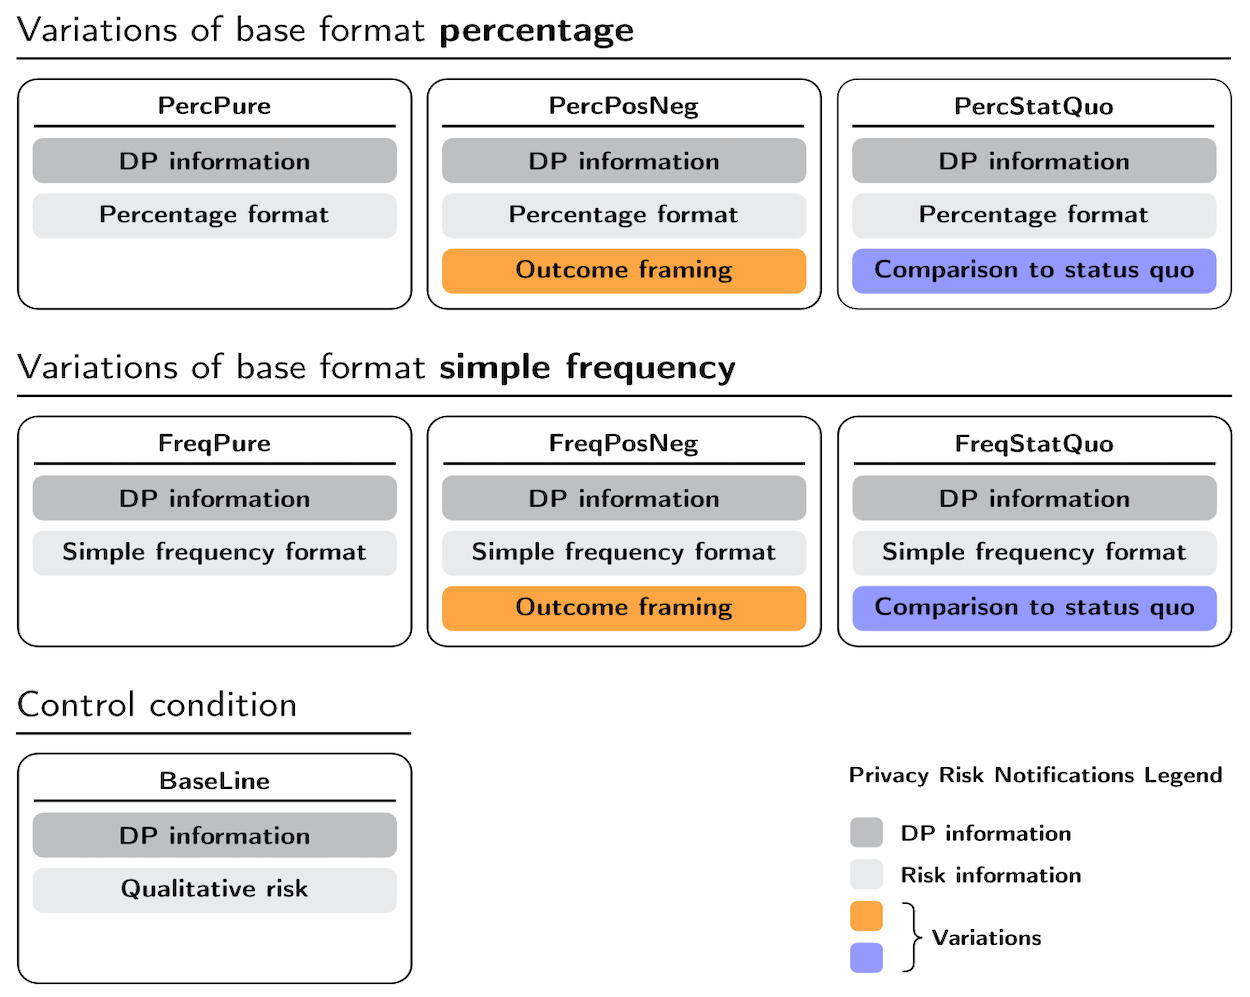 Overview and composition of the seven privacy risk notifications.